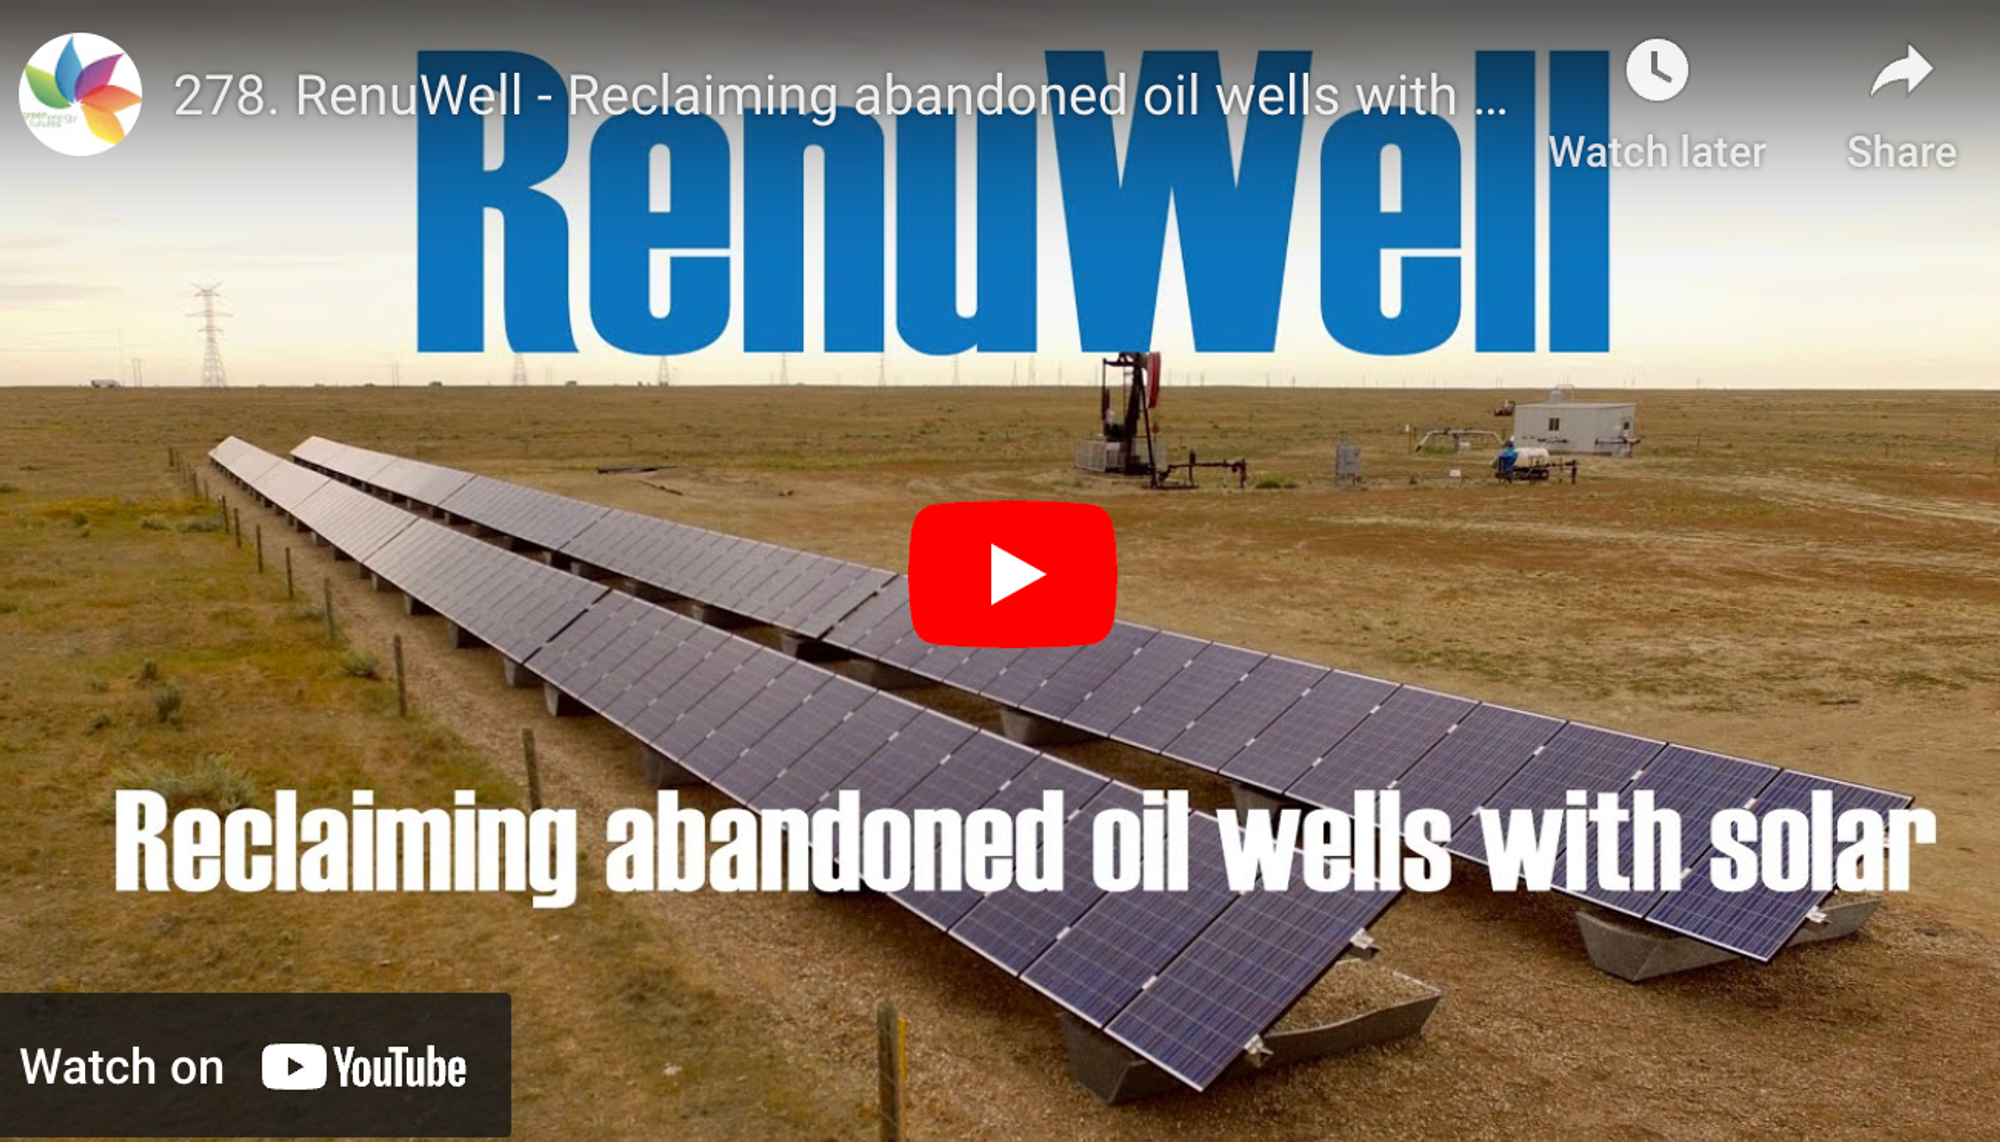 Solar breathes new life into abandoned oil wells